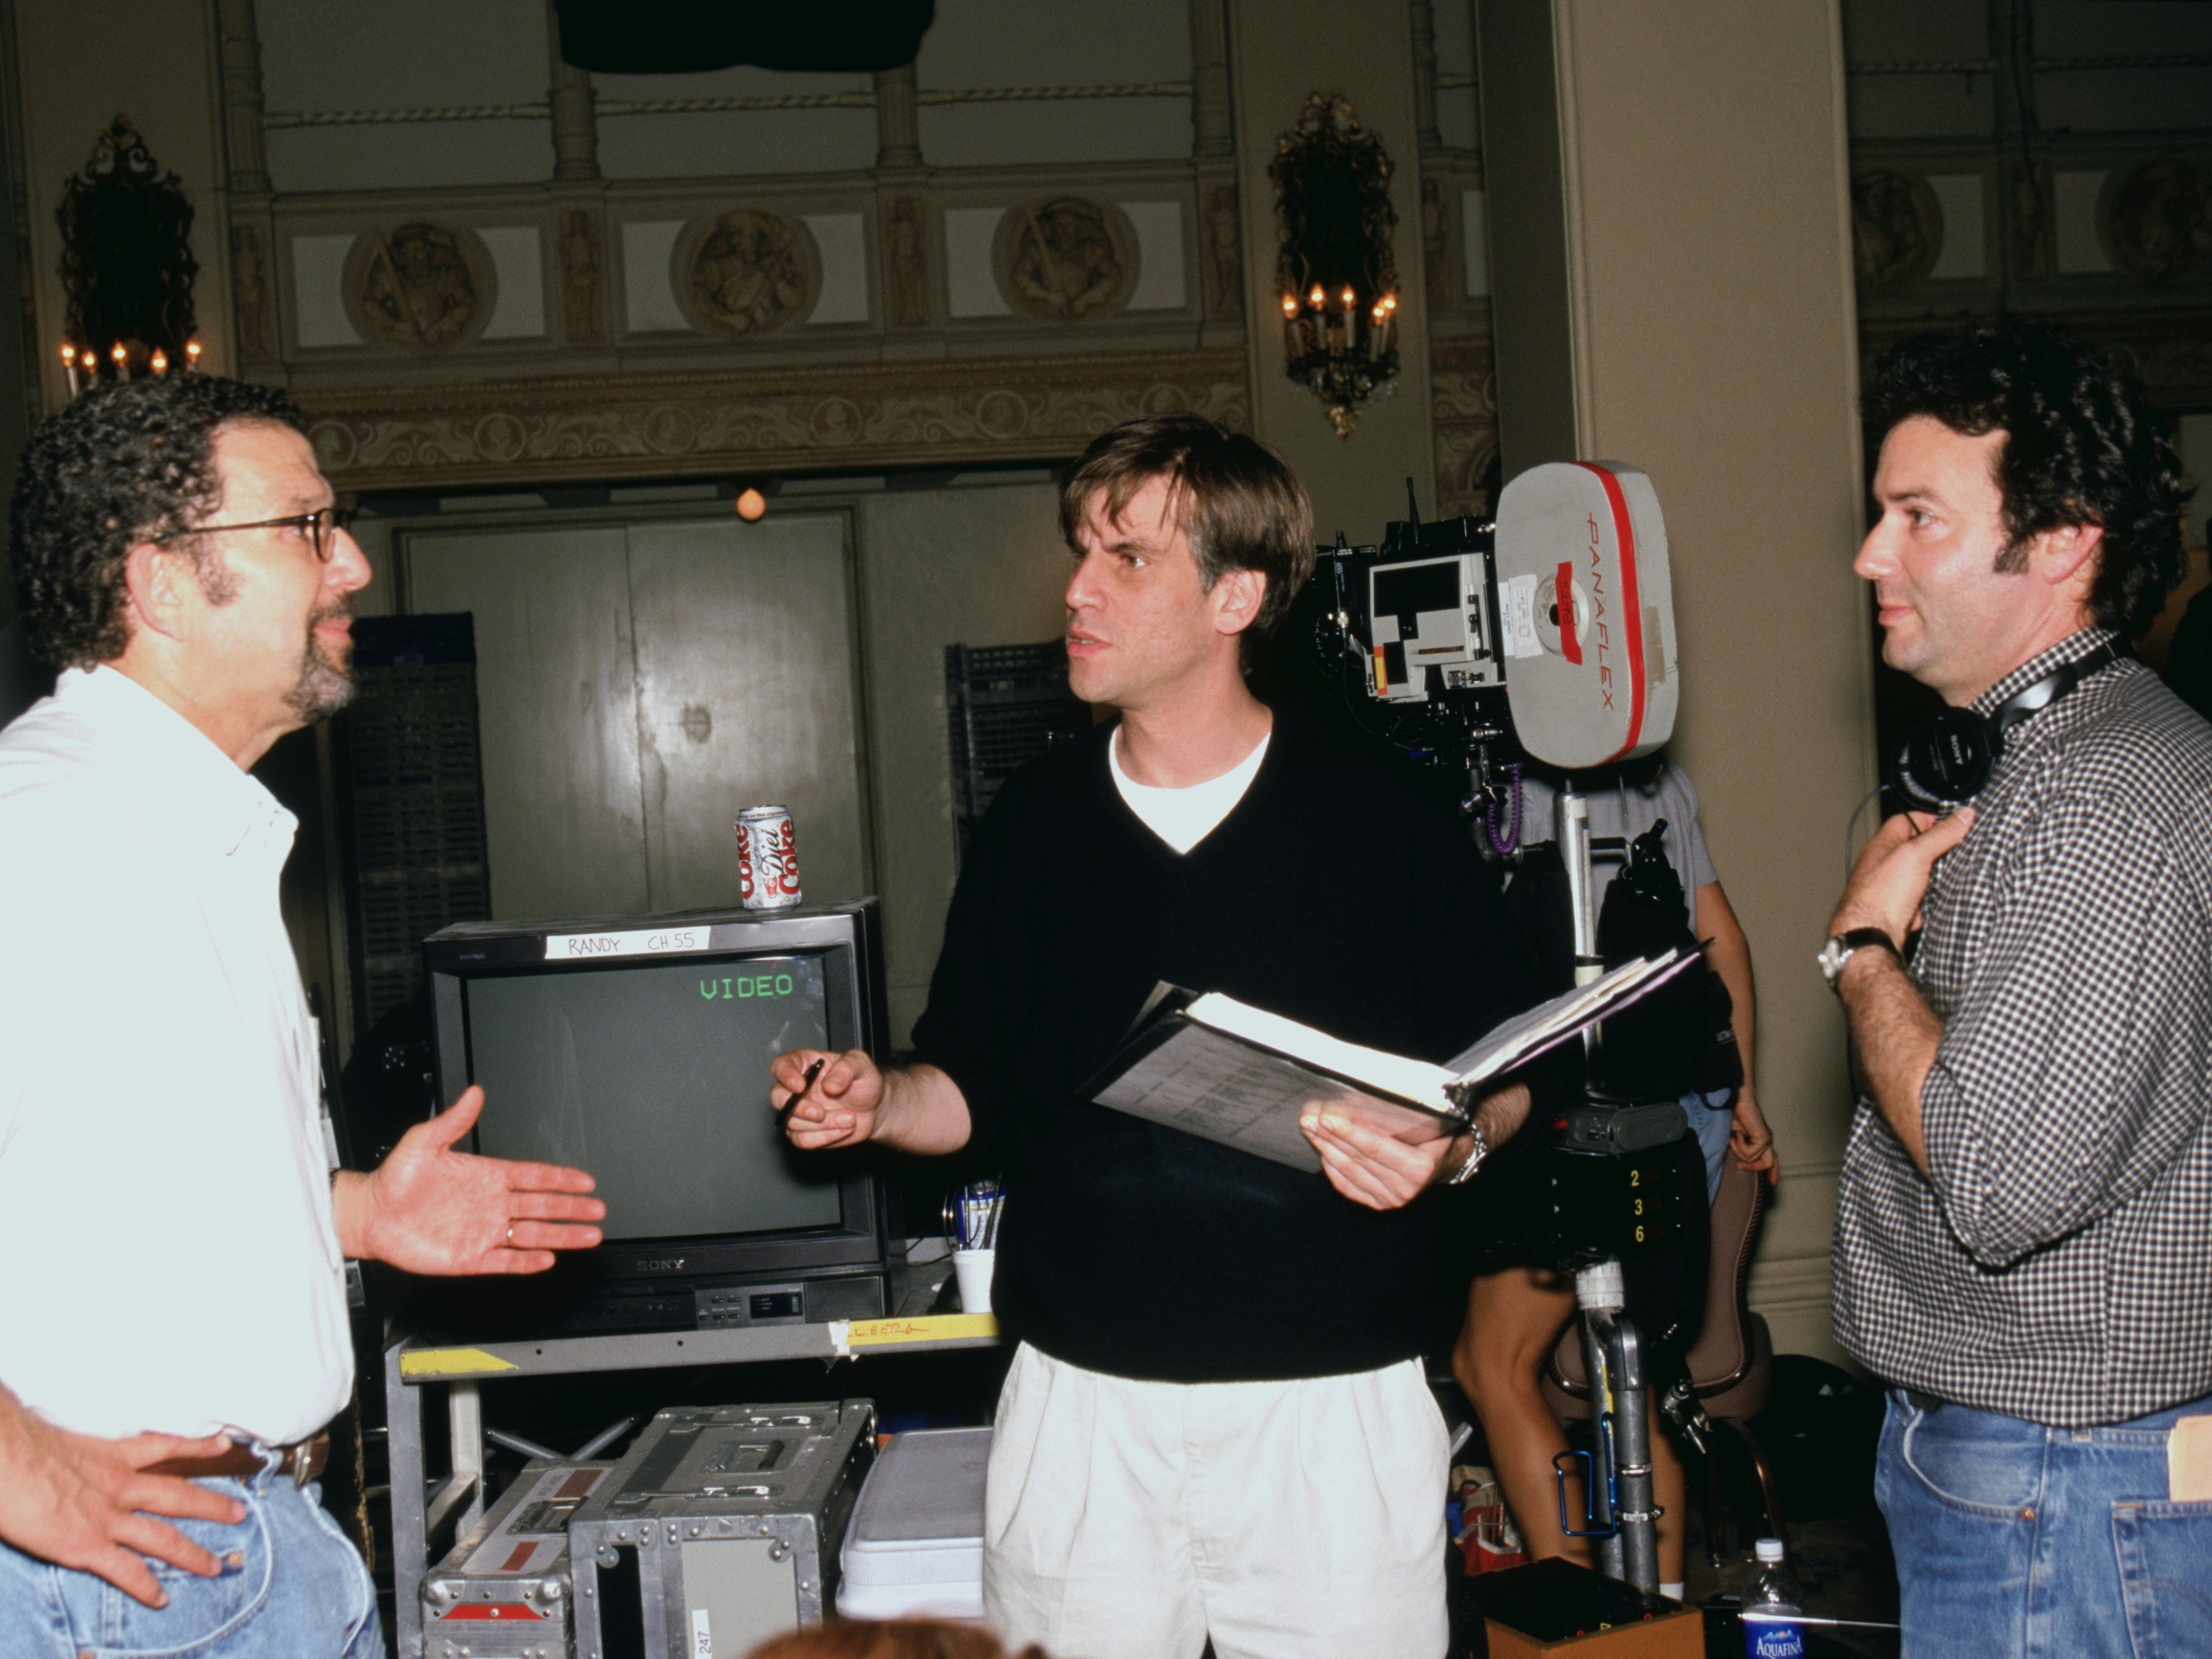 The fast schmaltz: Sorkin in his younger days, on the set of ‘The West Wing’ season one